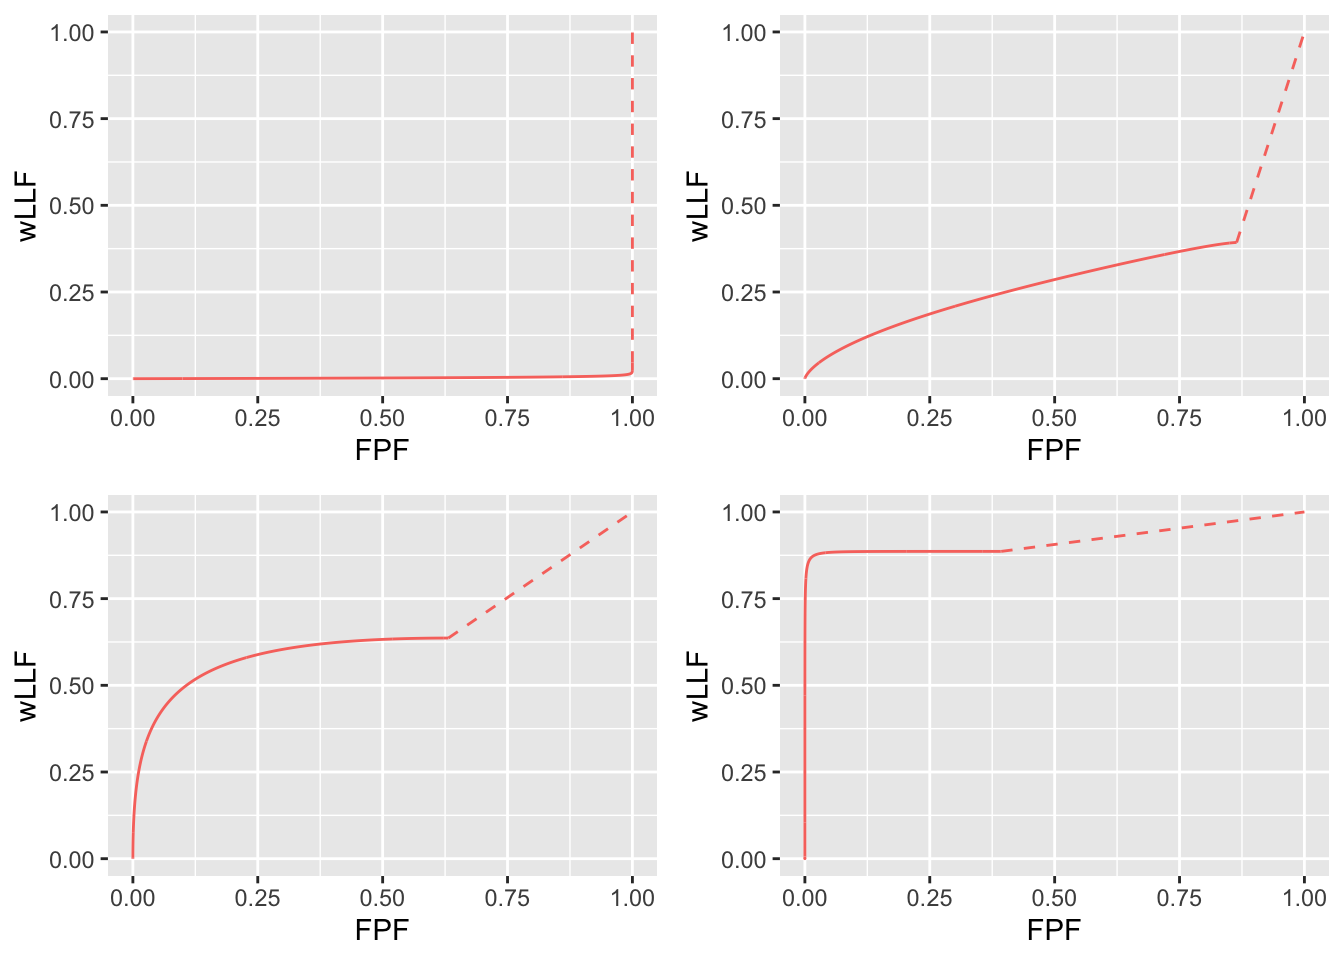 RSM-predicted wAFROC curves using intrinsic parameters $\lambda_i = 2$ and $\nu_i = 0.5$. Top left: $\mu = 0.1$. Top right: $\mu = 1$. Bottom left: $\mu = 2$. Bottom right: $\mu = 4$. As $\mu$ increases the curve approaches the top-left corner. Each curve includes an inaccessible dashed linear extension to (1,1). Since the plot is contained within the unit square its AUC is a valid figure of merit.